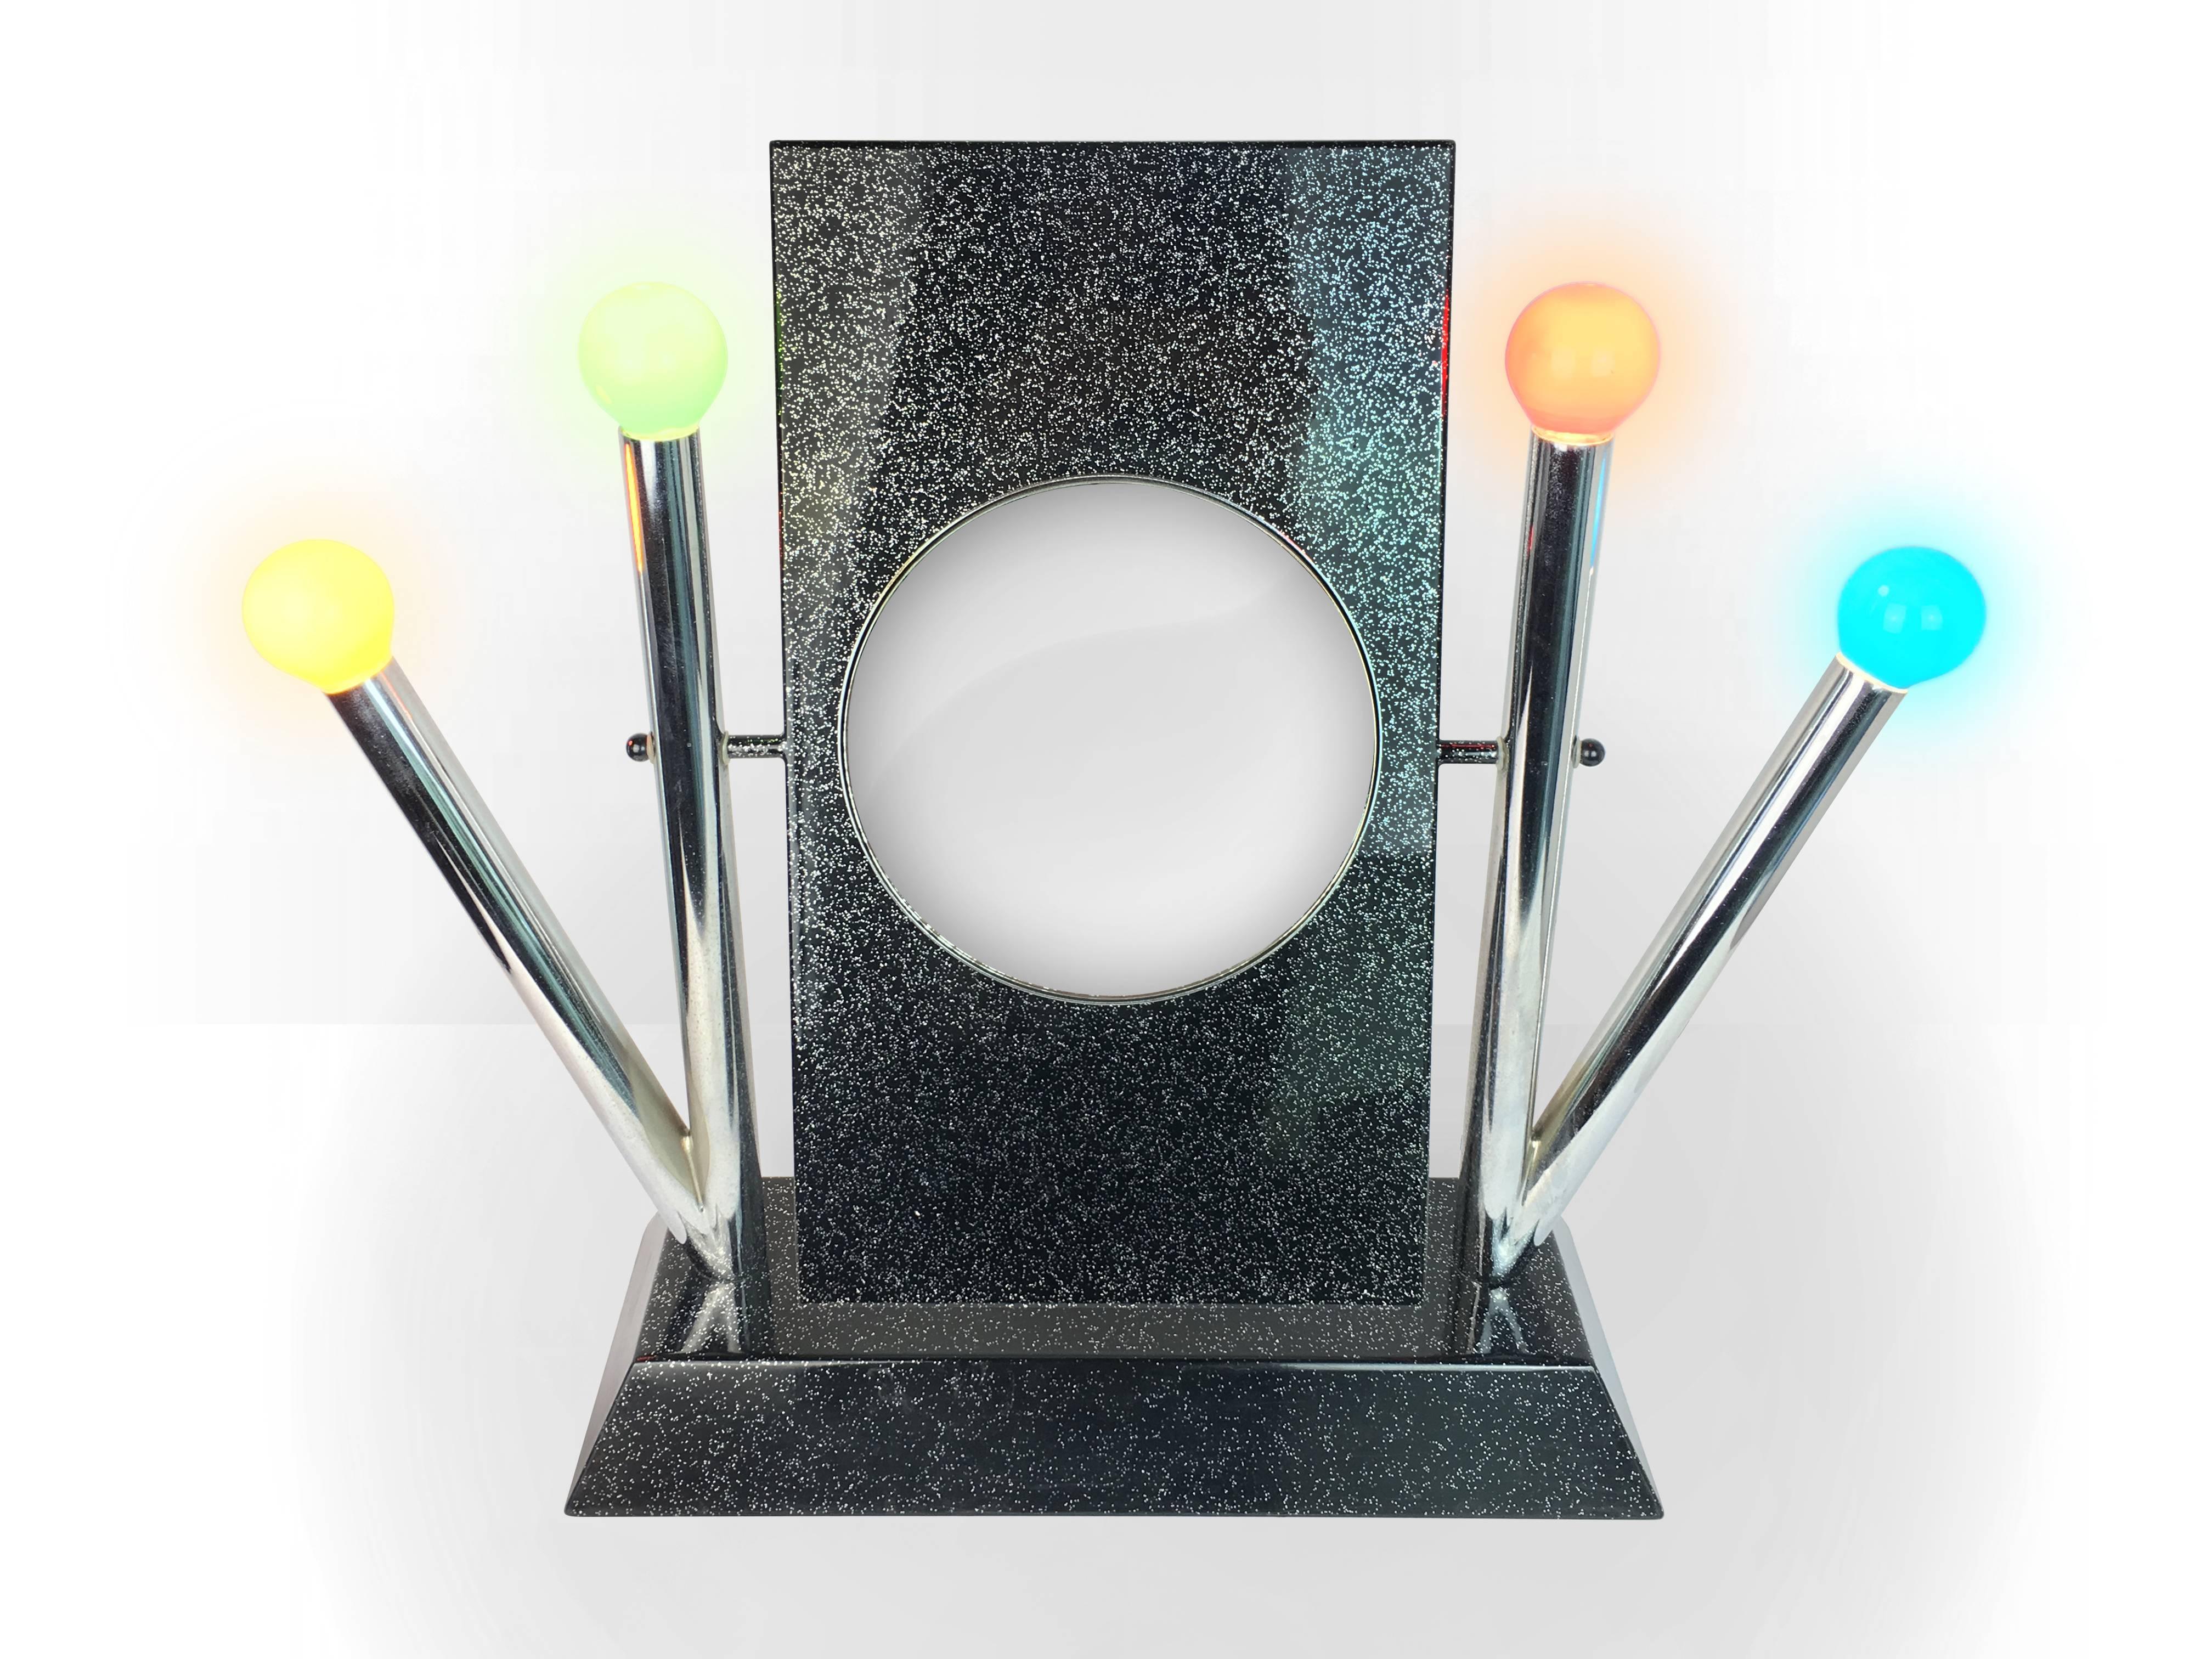 Double side rotatable Yucca table mirror with colourful lights designed by Anna Anselmi and manufactured by Bieffeplast. Lights can be exchanged with lamps of any color.